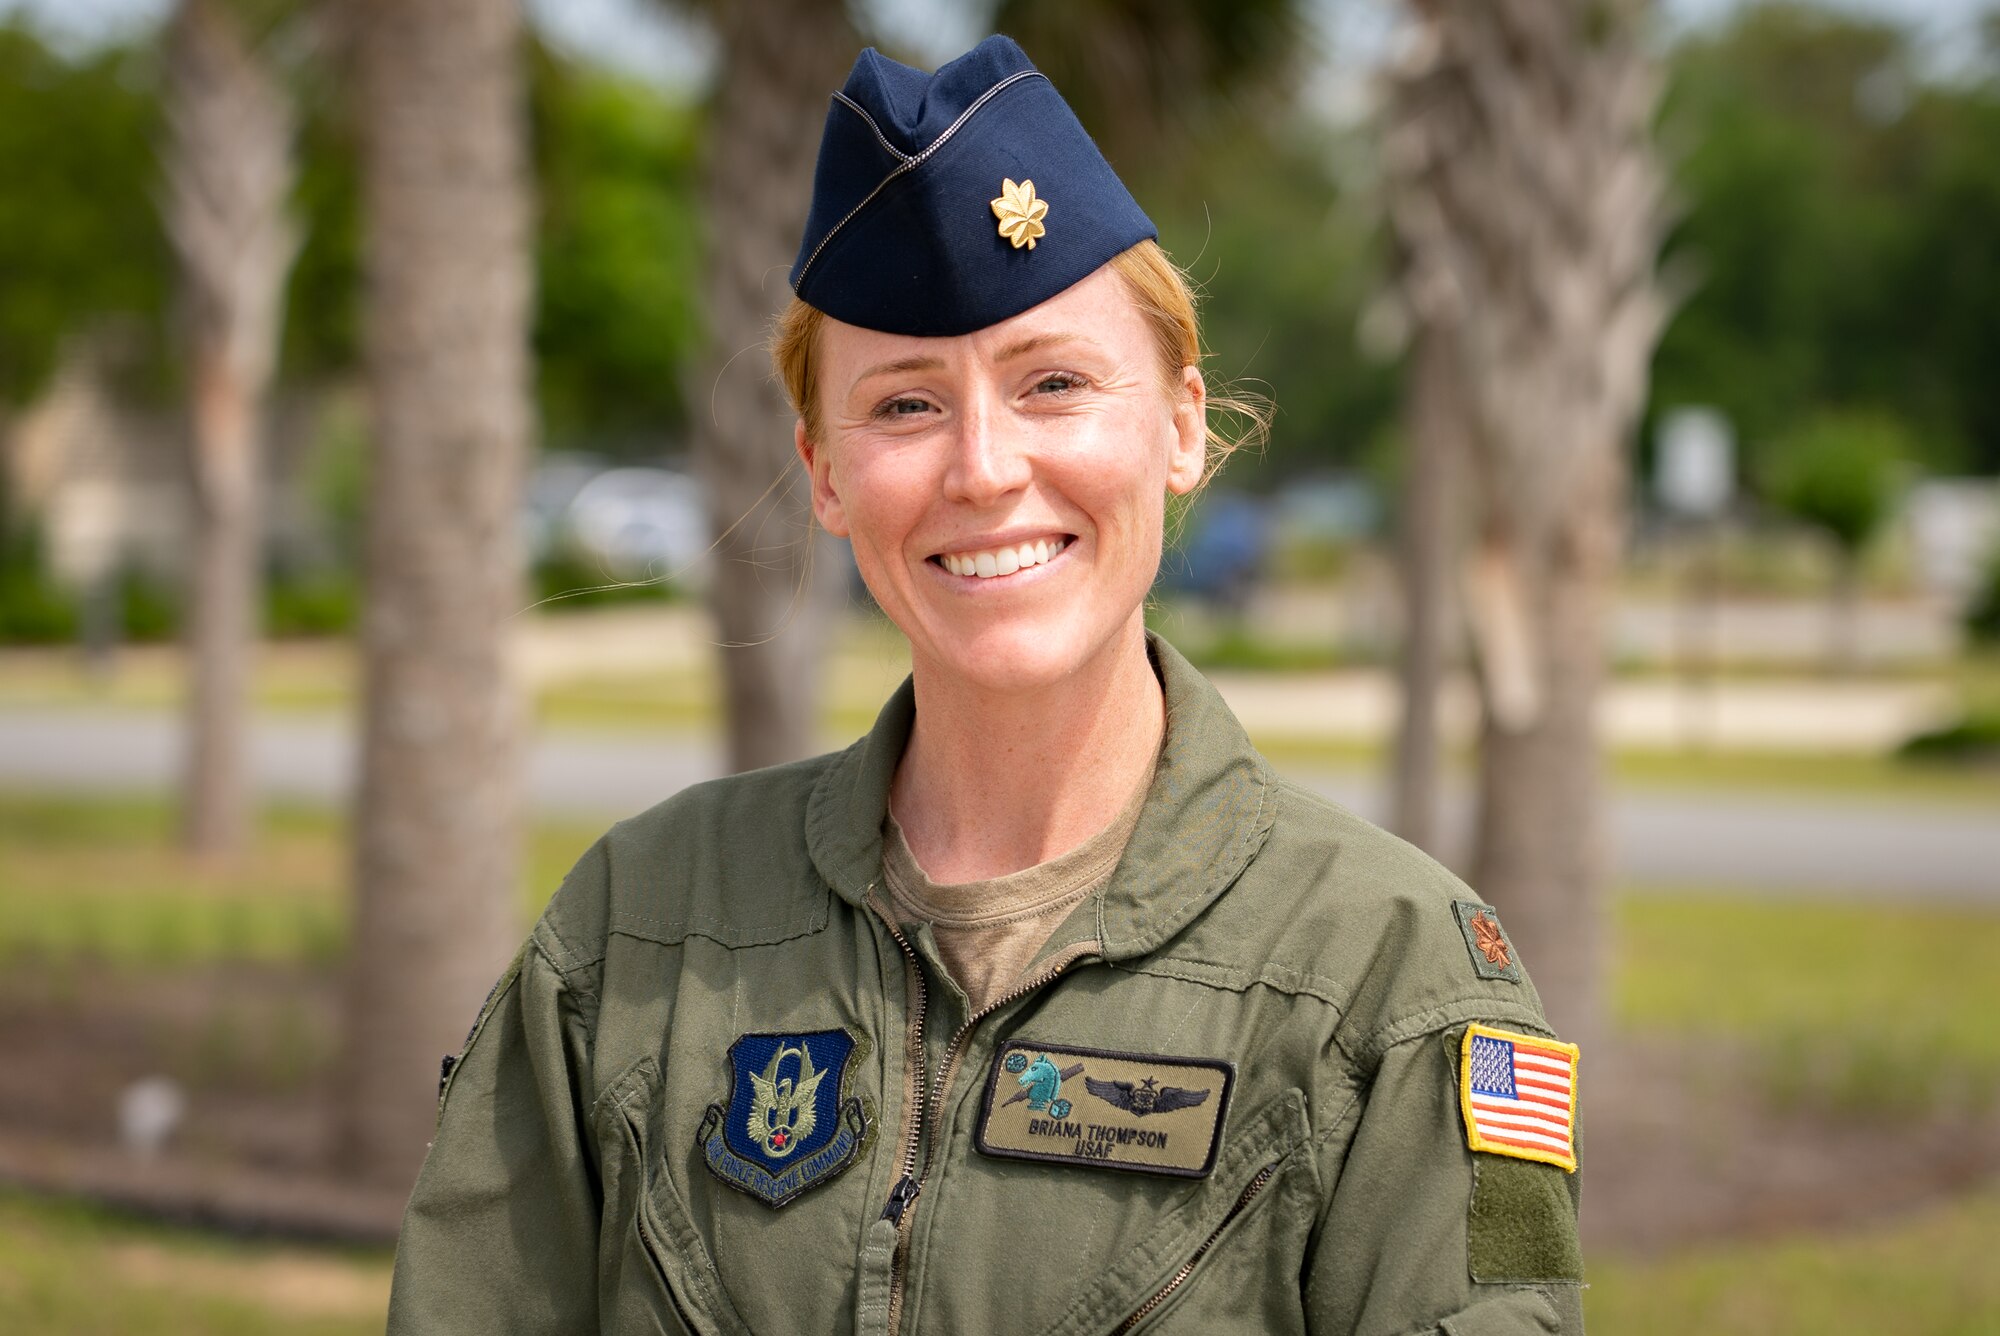 Female Airman in flight suit poses for photo.